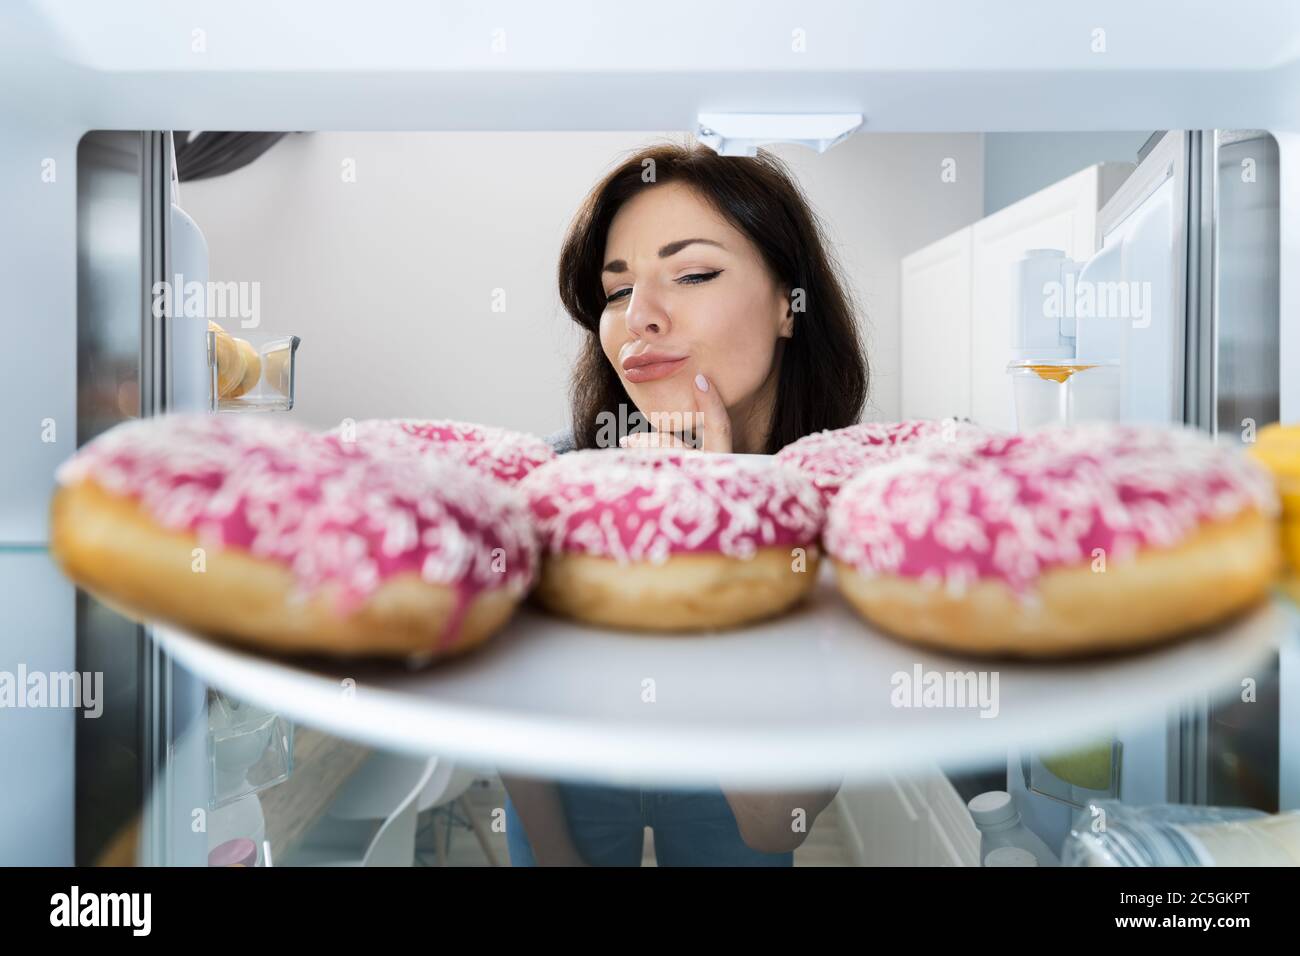 Confused Woman Thinking Looking At Sweets In Fridge Or Refrigerator Stock Photo